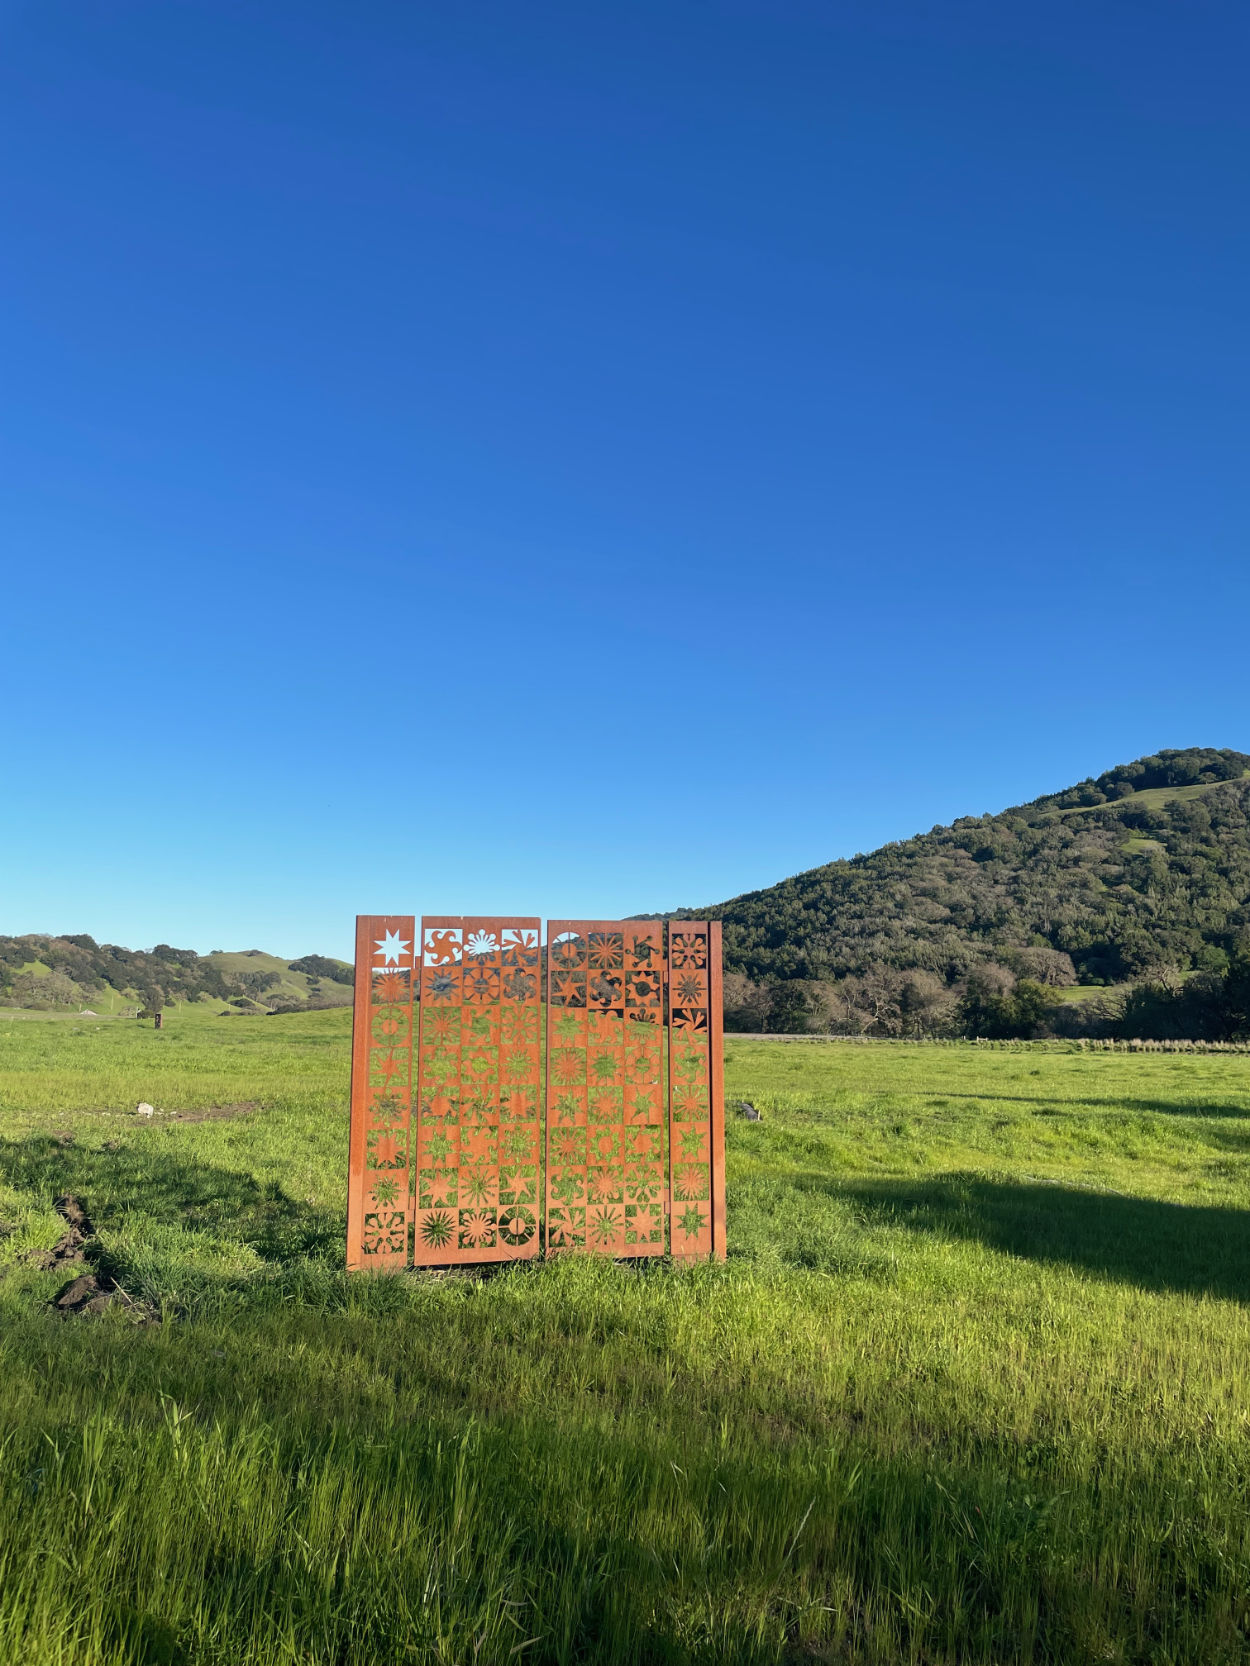 Lucia Eames’s sculptural gate at the Eames Ranch with green hills and blue skies